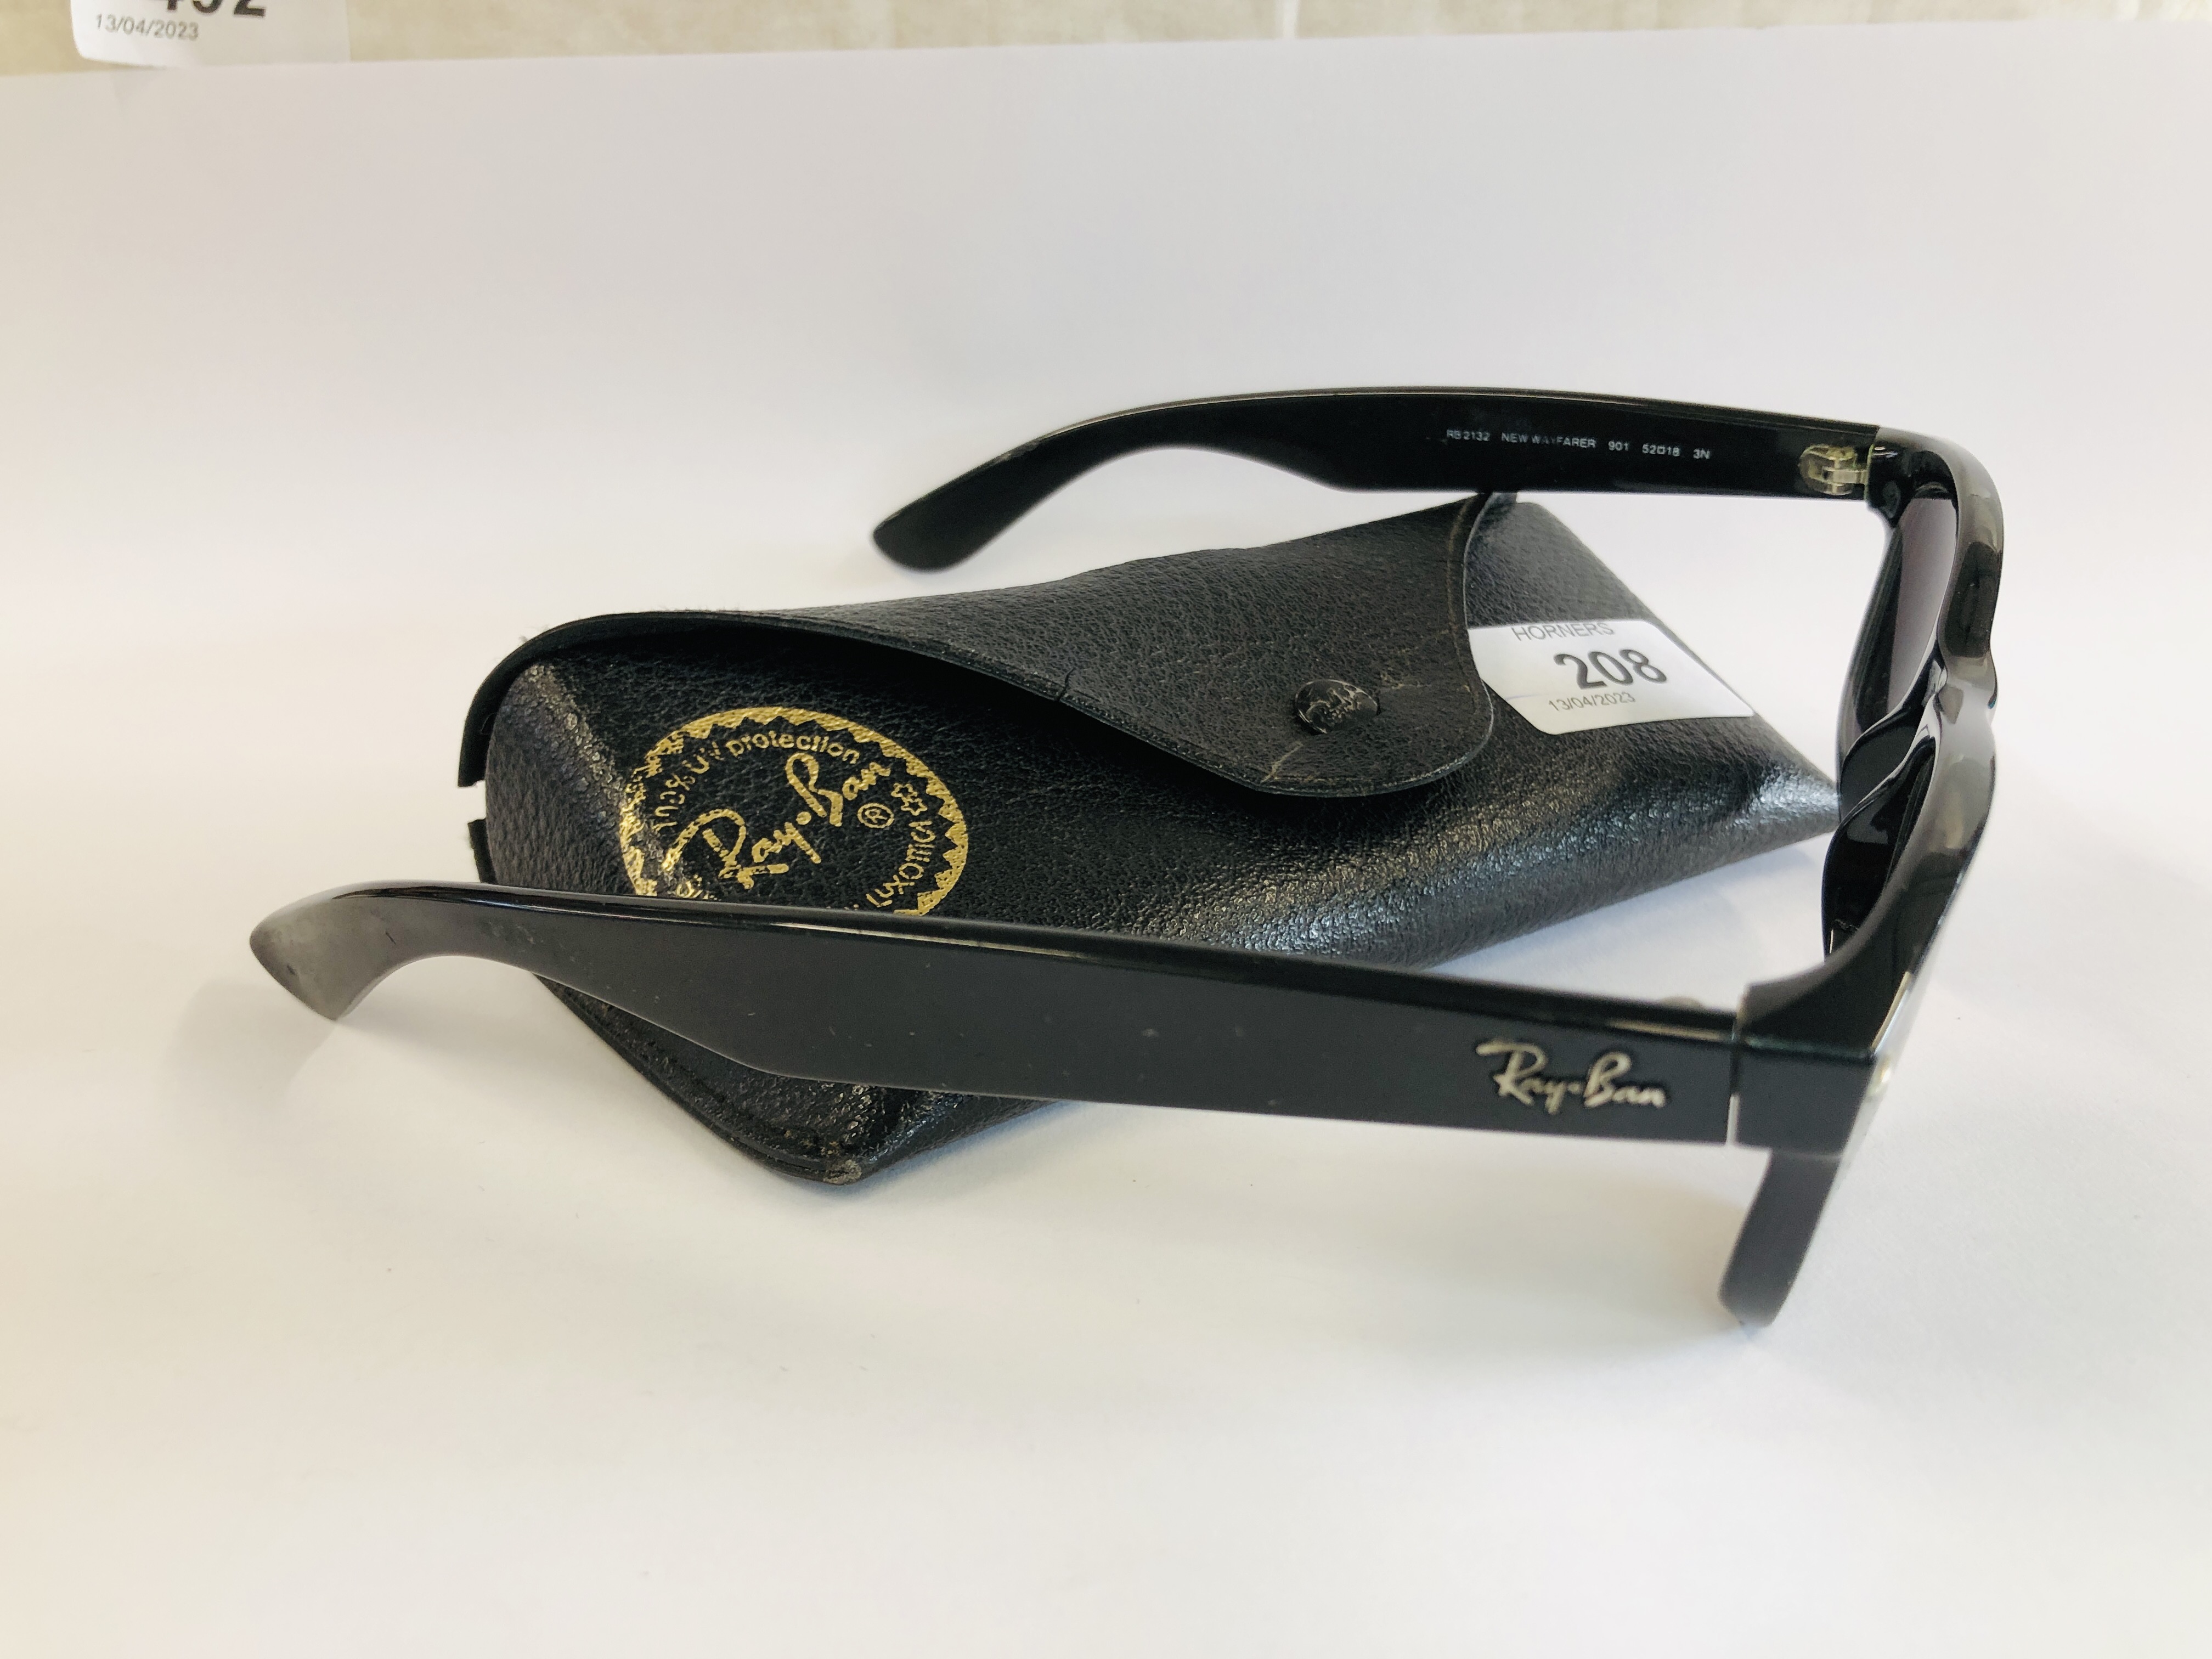 A PAIR OF PRESCRIPTION SUNGLASSES MARKED RAY-BAN RB2132 WITH CASE - Image 5 of 7